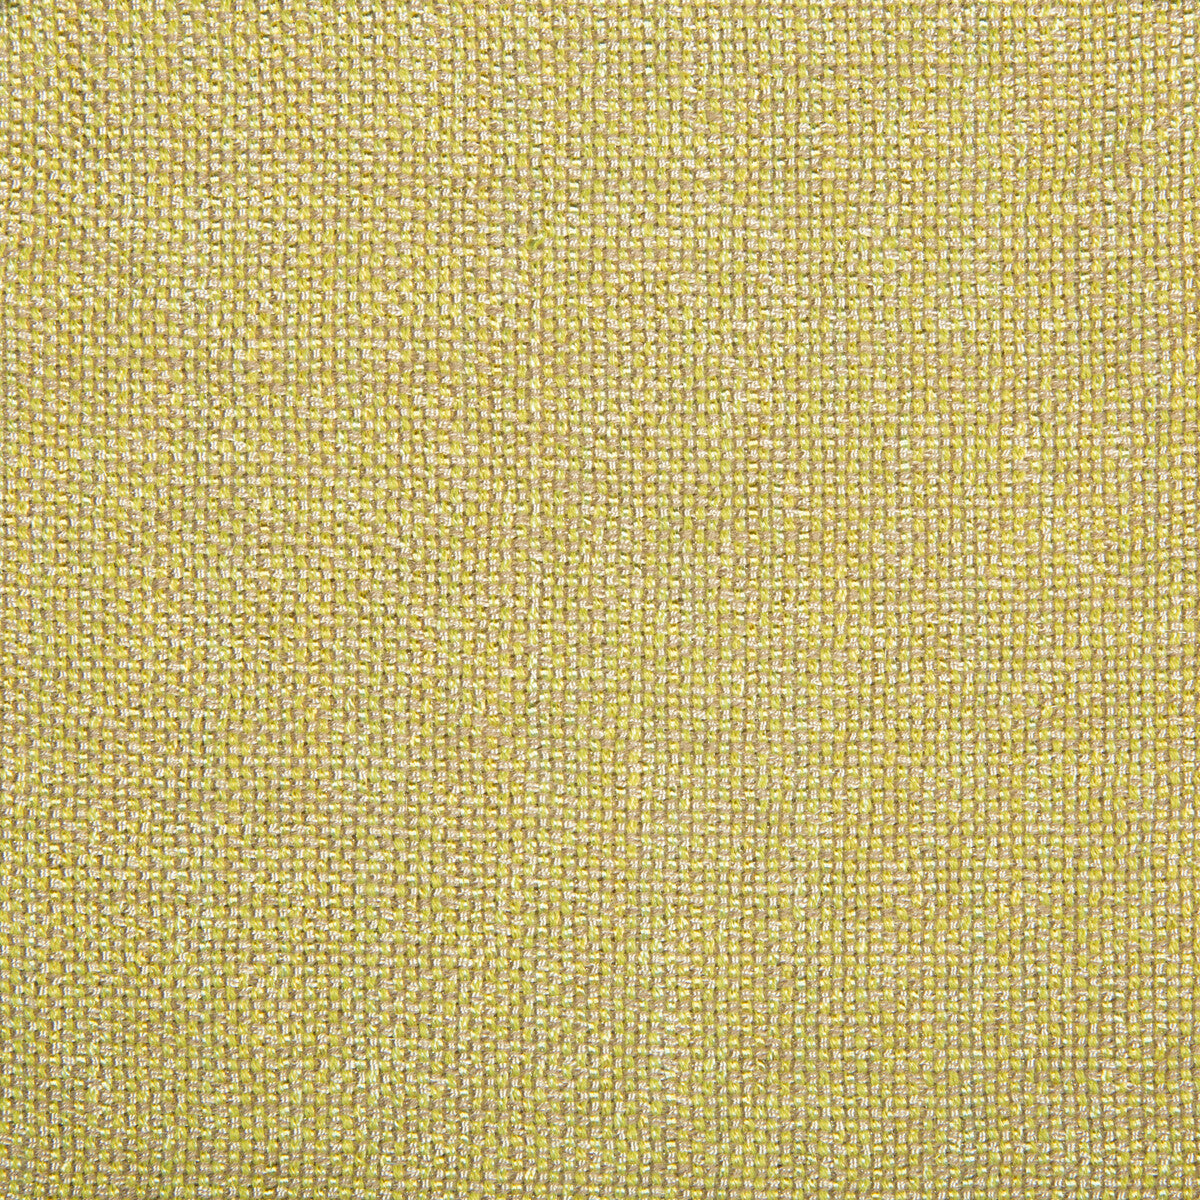 Kravet Contract fabric in 4458-114 color - pattern 4458.114.0 - by Kravet Contract